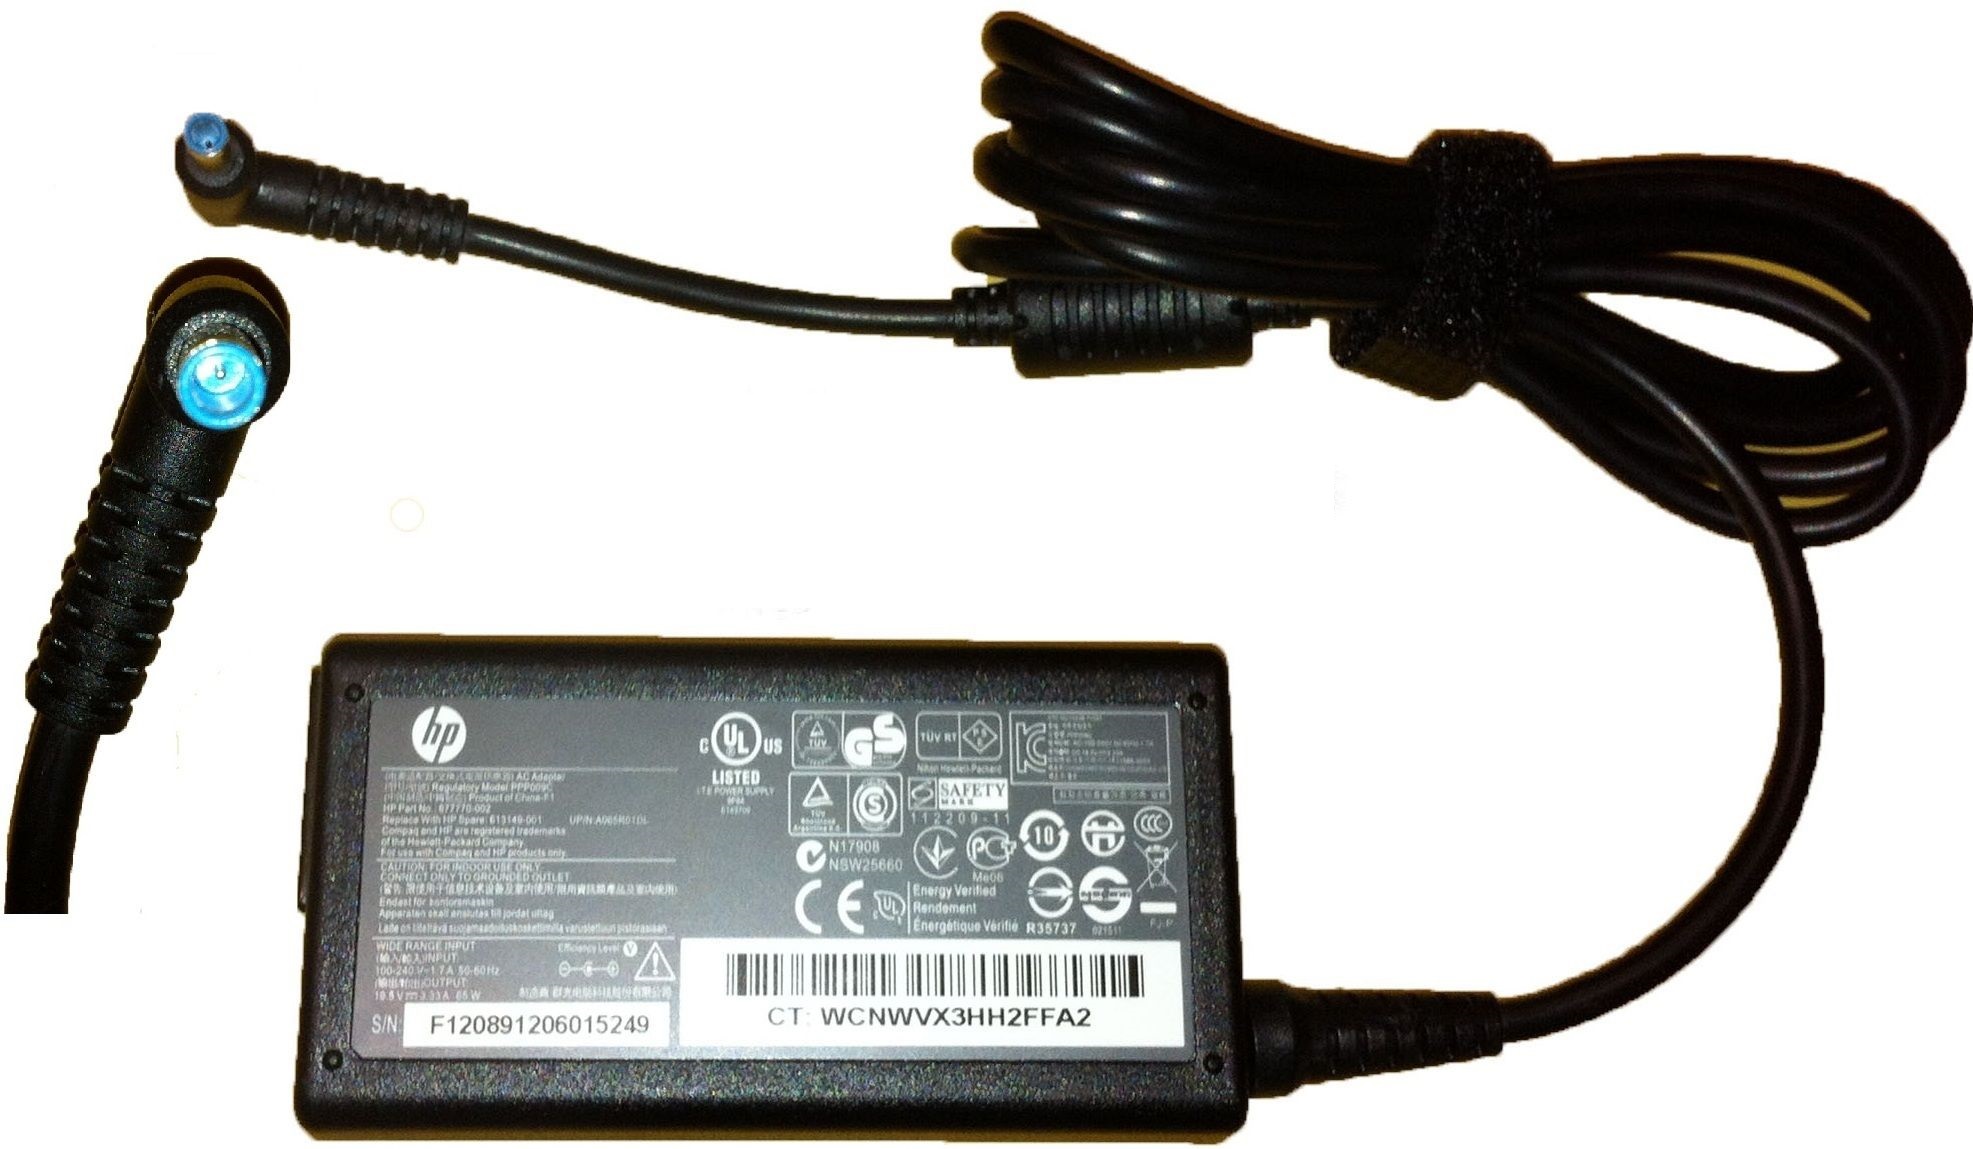 HP Laptop Charger: Everything You Need to Know